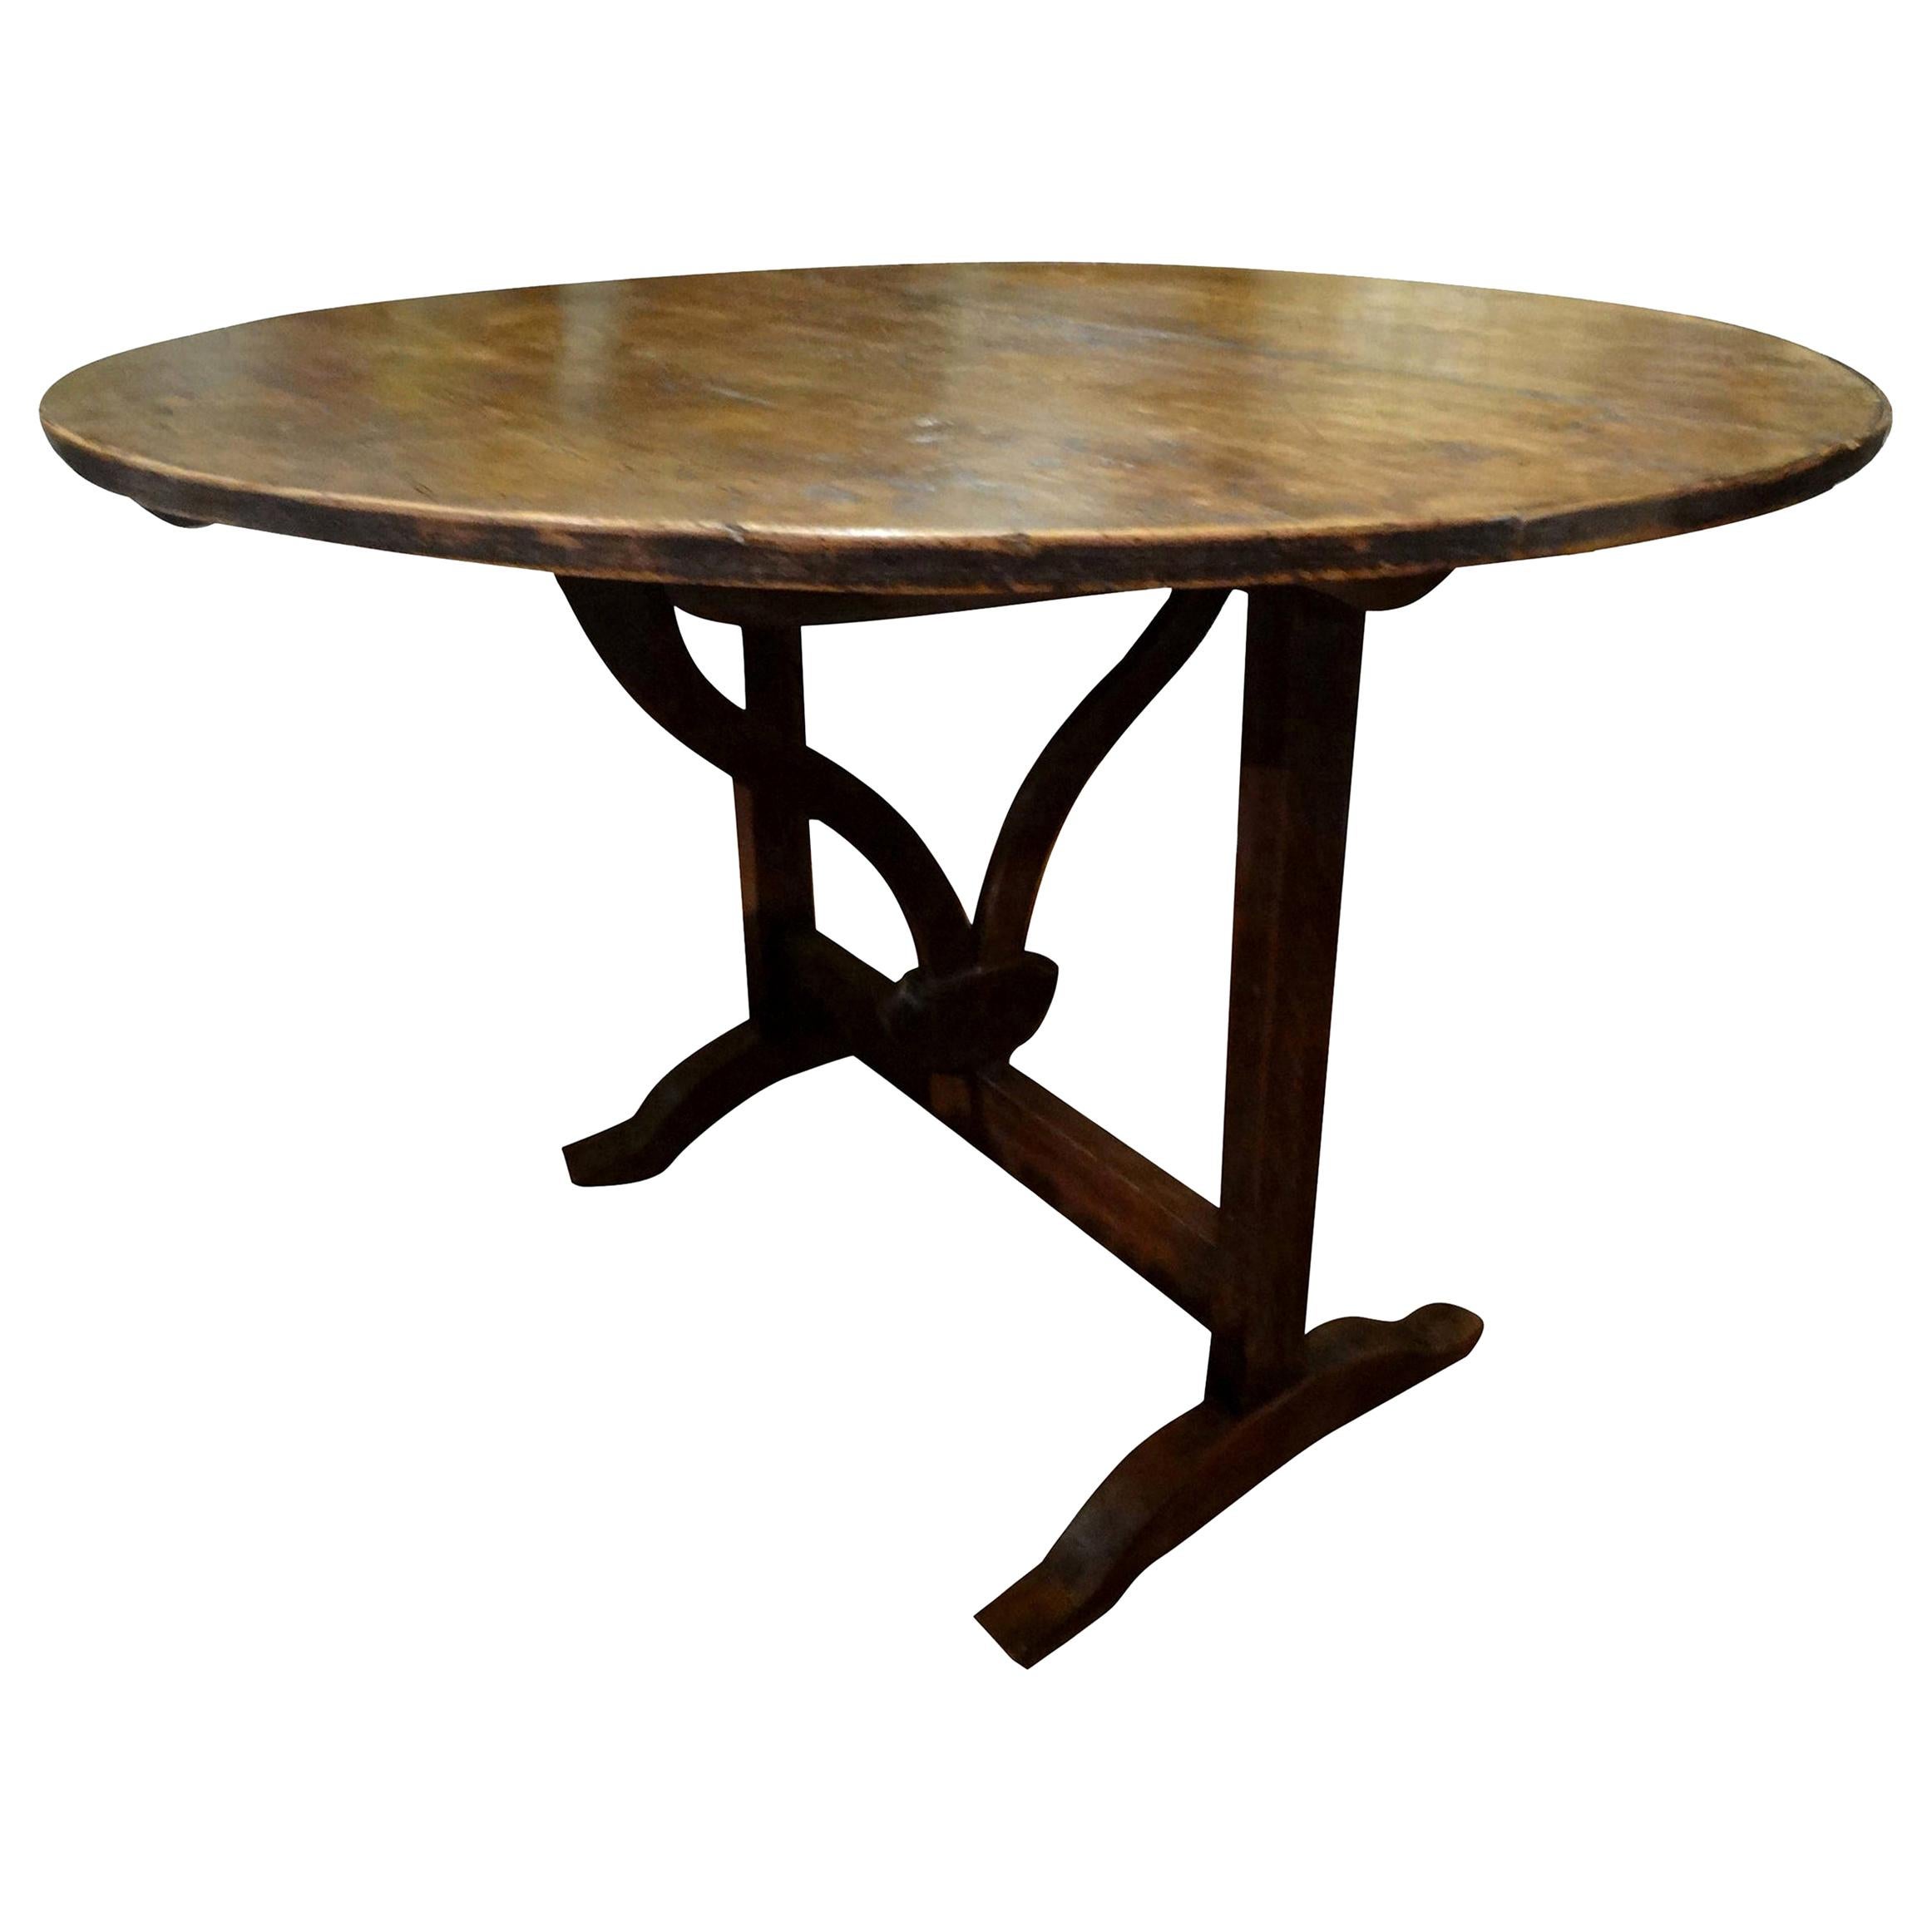 Offered is a 19th century French round walnut wine tasting table from the Burgundy Region of France.
Our French wine table has a rotating stretcher and trestle which supports the tabletop when in use. This walnut wine table can be folded
for